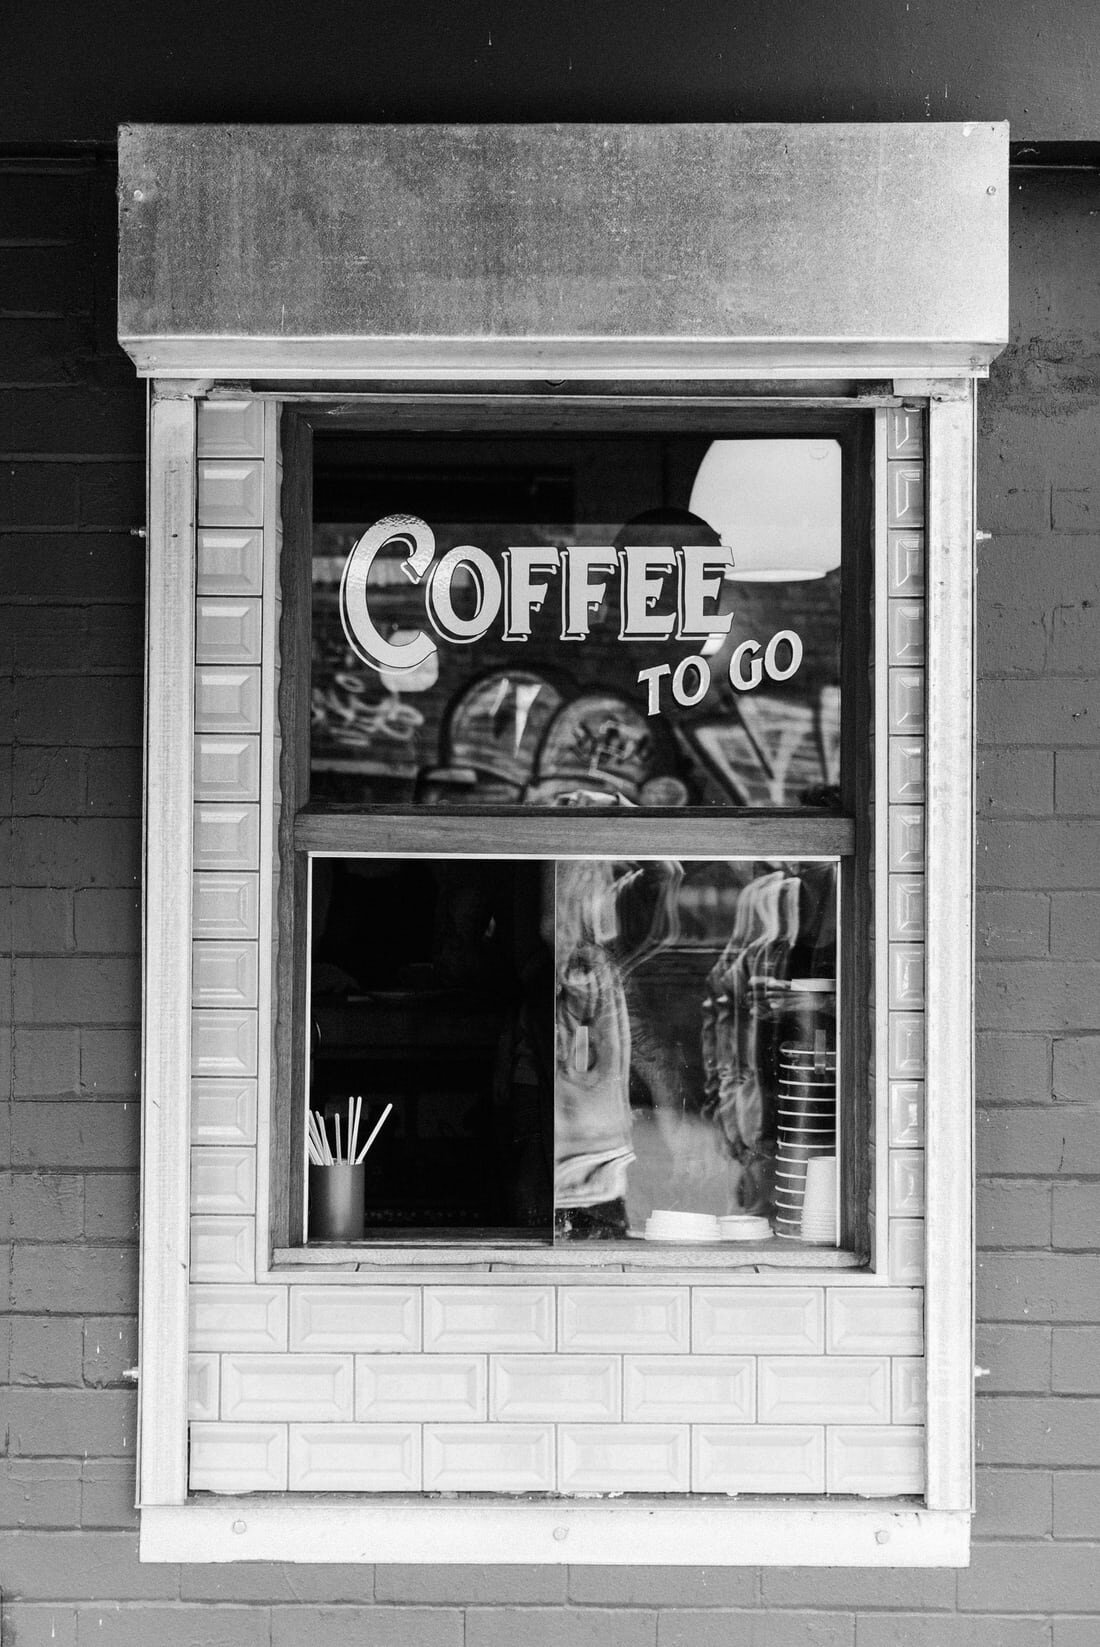 A takeout window with a sign reading “COFFEE TO GO” set within a brick wall. Via Unsplash